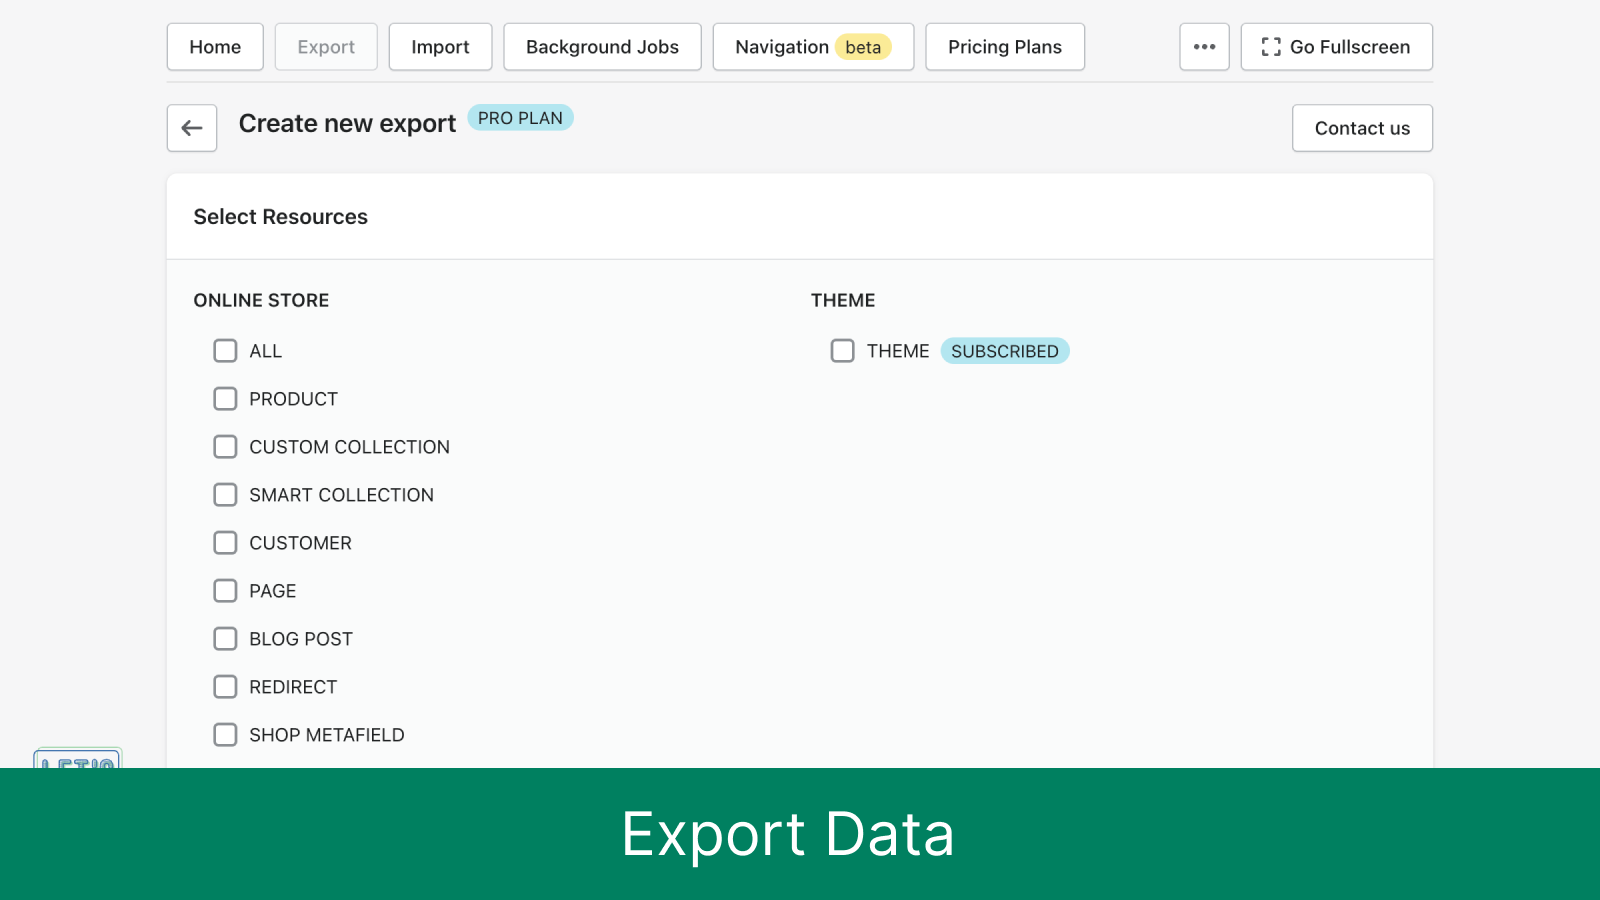 Export Data from Resource Store